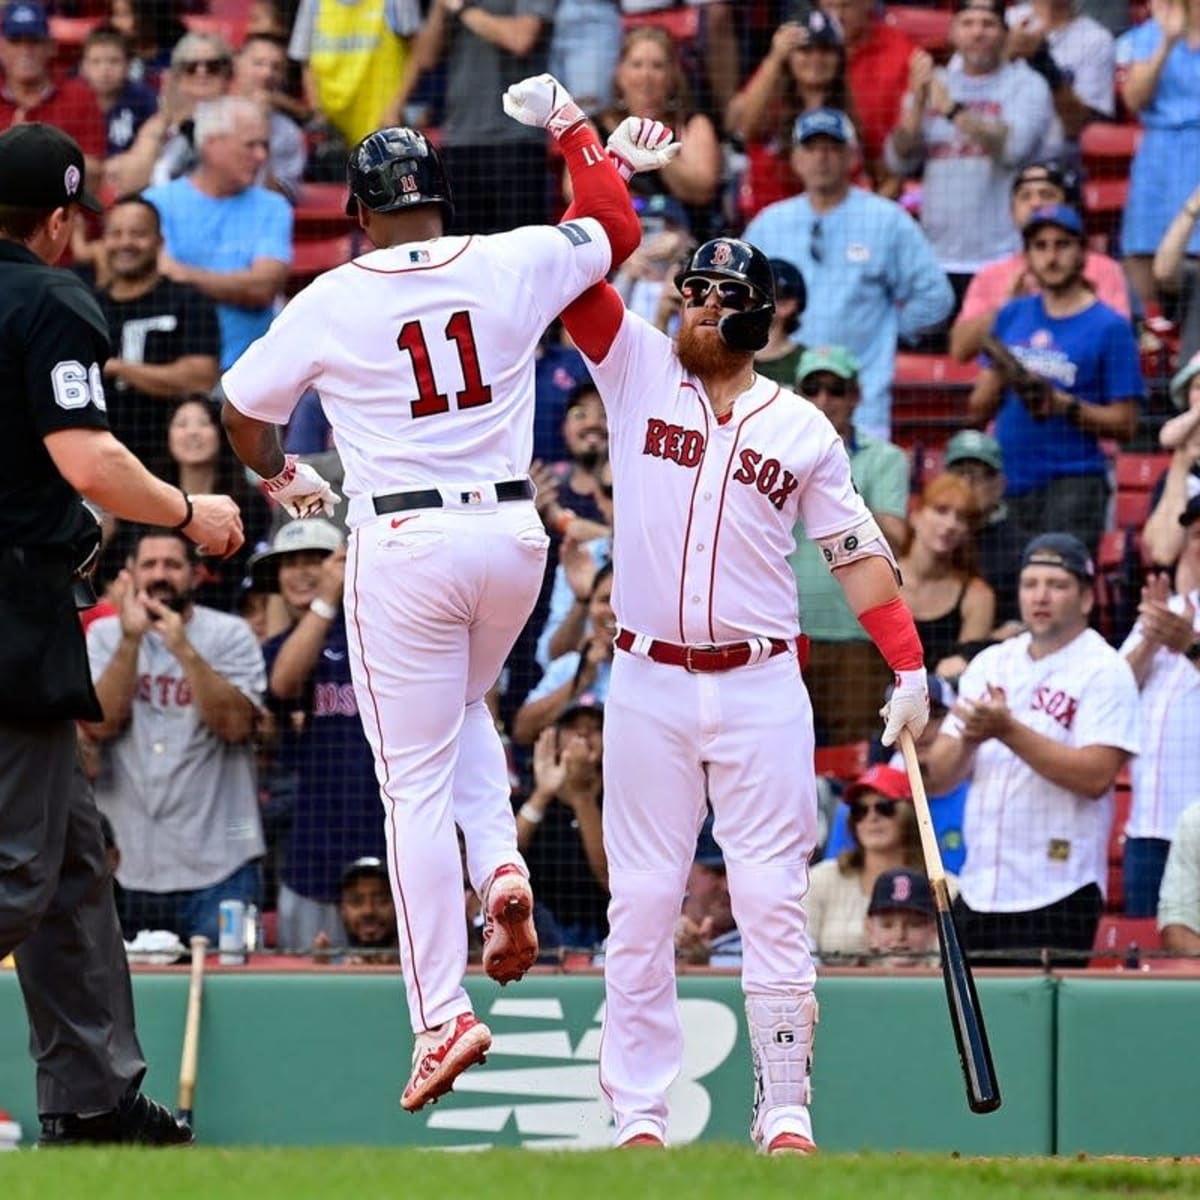 How to Watch the Red Sox vs. Blue Jays Game: Streaming & TV Info